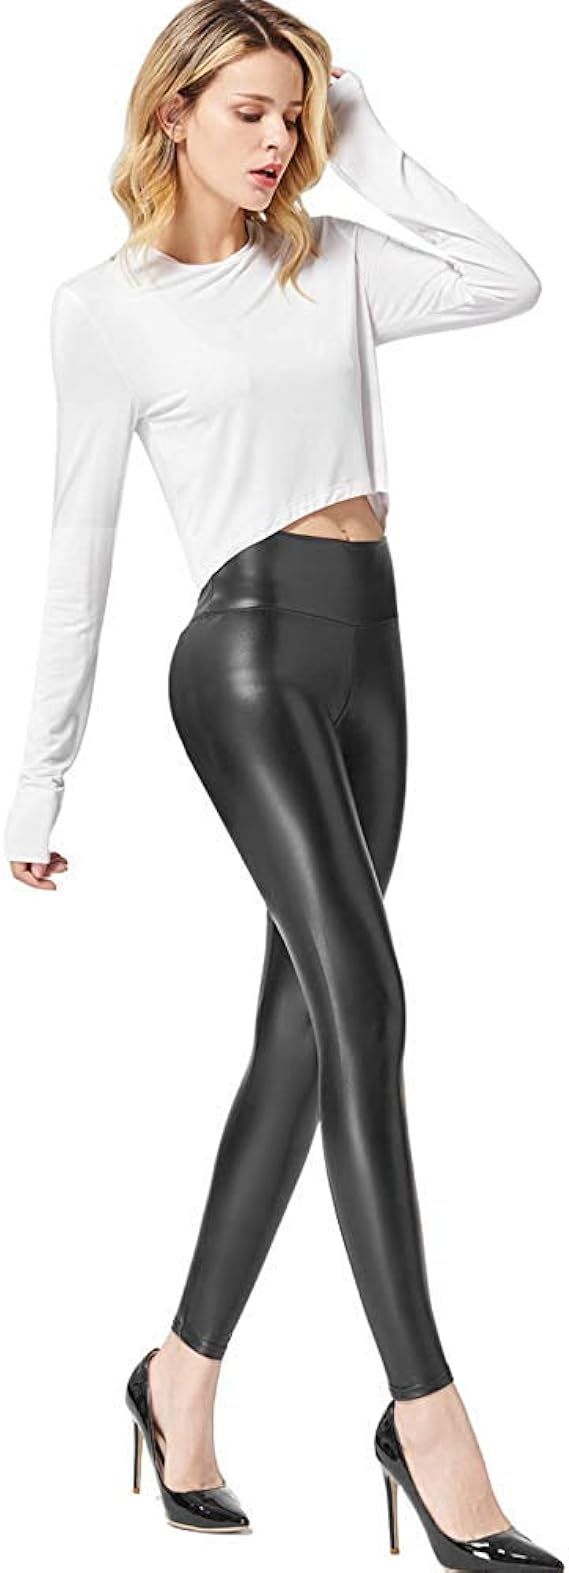 Ginasy Faux Leather Leggings Pants Stretchy High Waisted Tights for Women | Amazon (US)